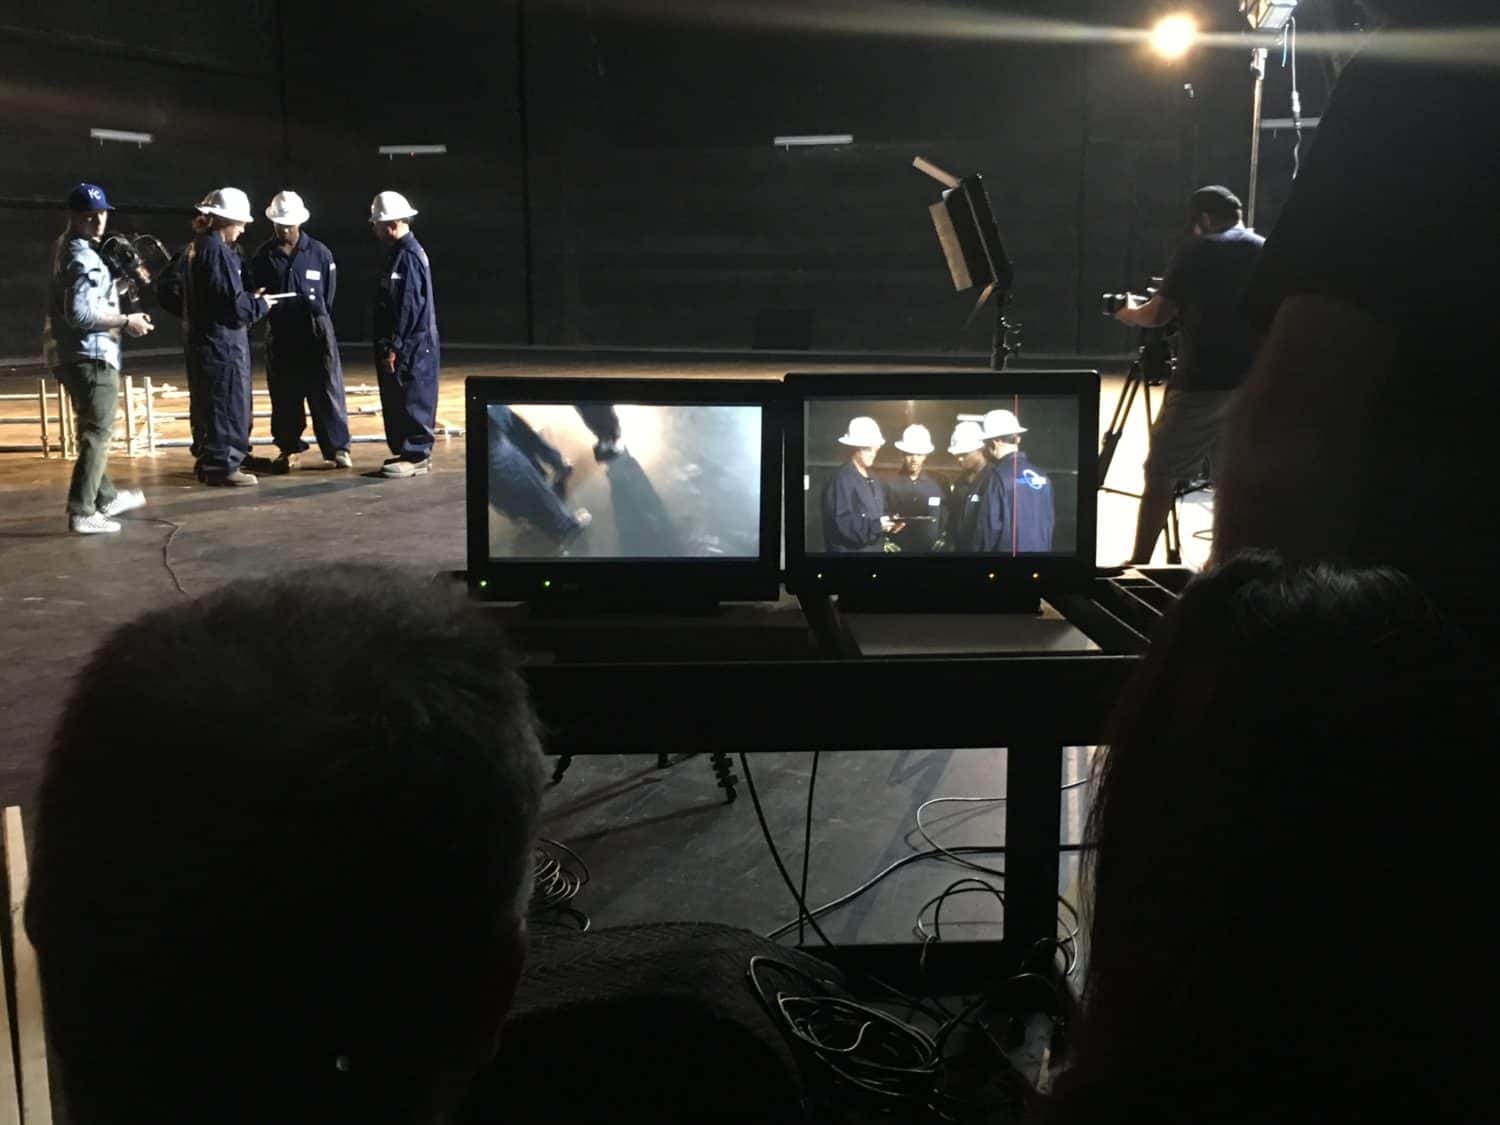 A production team films three actors dressed in construction uniform gear